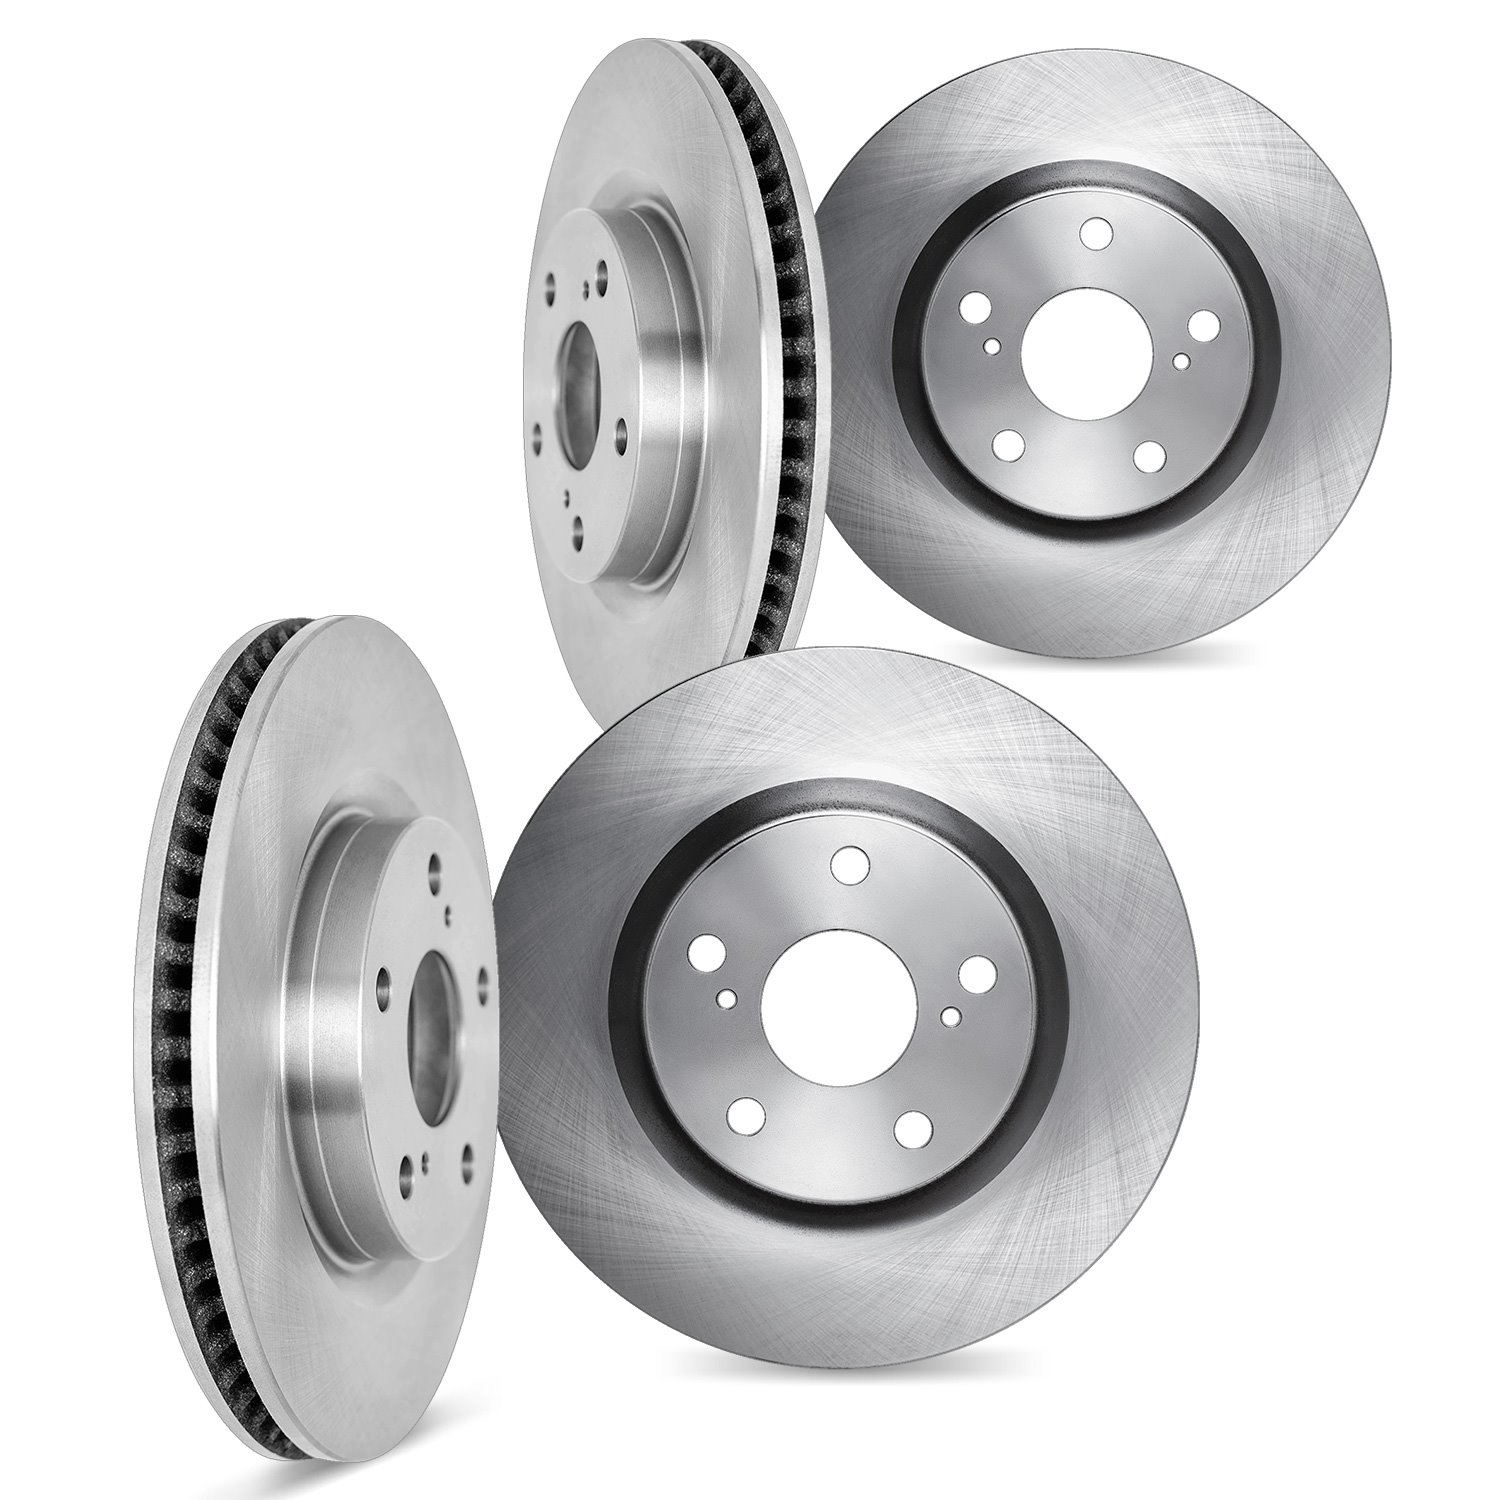 6004-67126 Brake Rotors, Fits Select Infiniti/Nissan, Position: Front and Rear